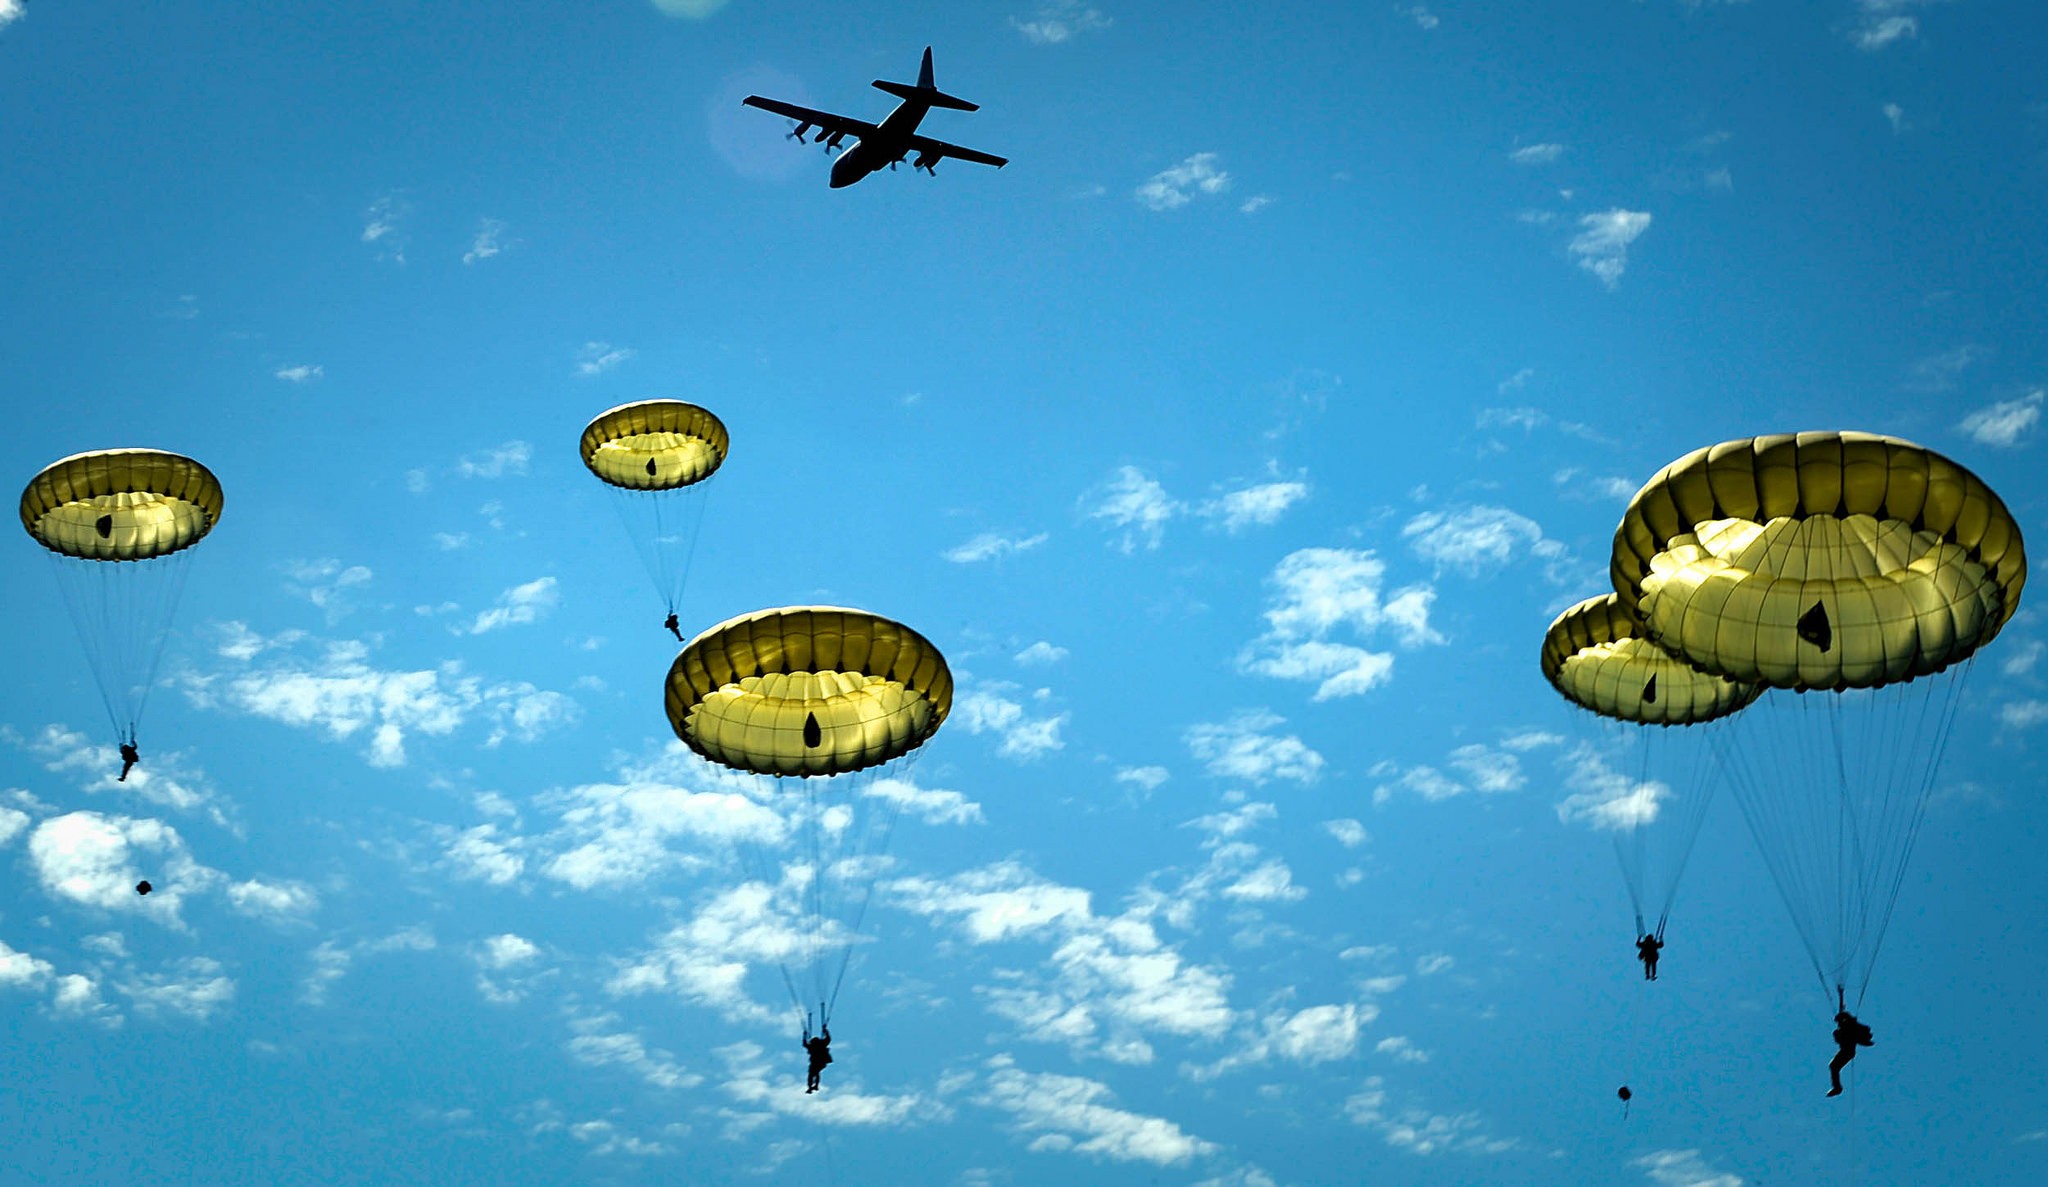 General 2048x1187 United States Army airborne military USA parachutes Lockheed C-130 Hercules military vehicle aircraft military aircraft soldier paratroopers